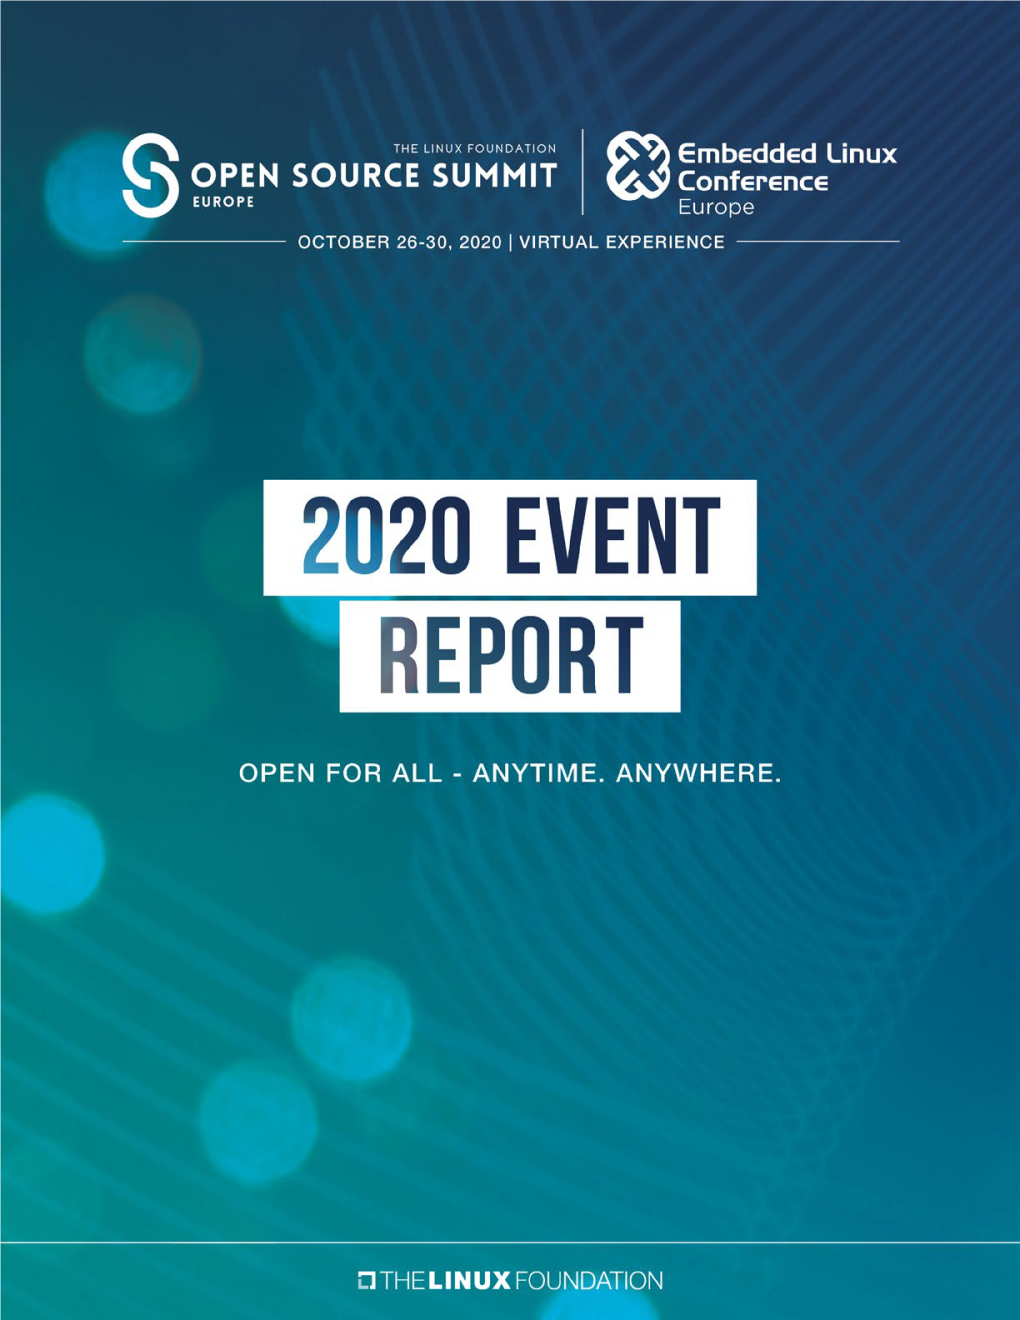 VIEW the POST Event REPORT